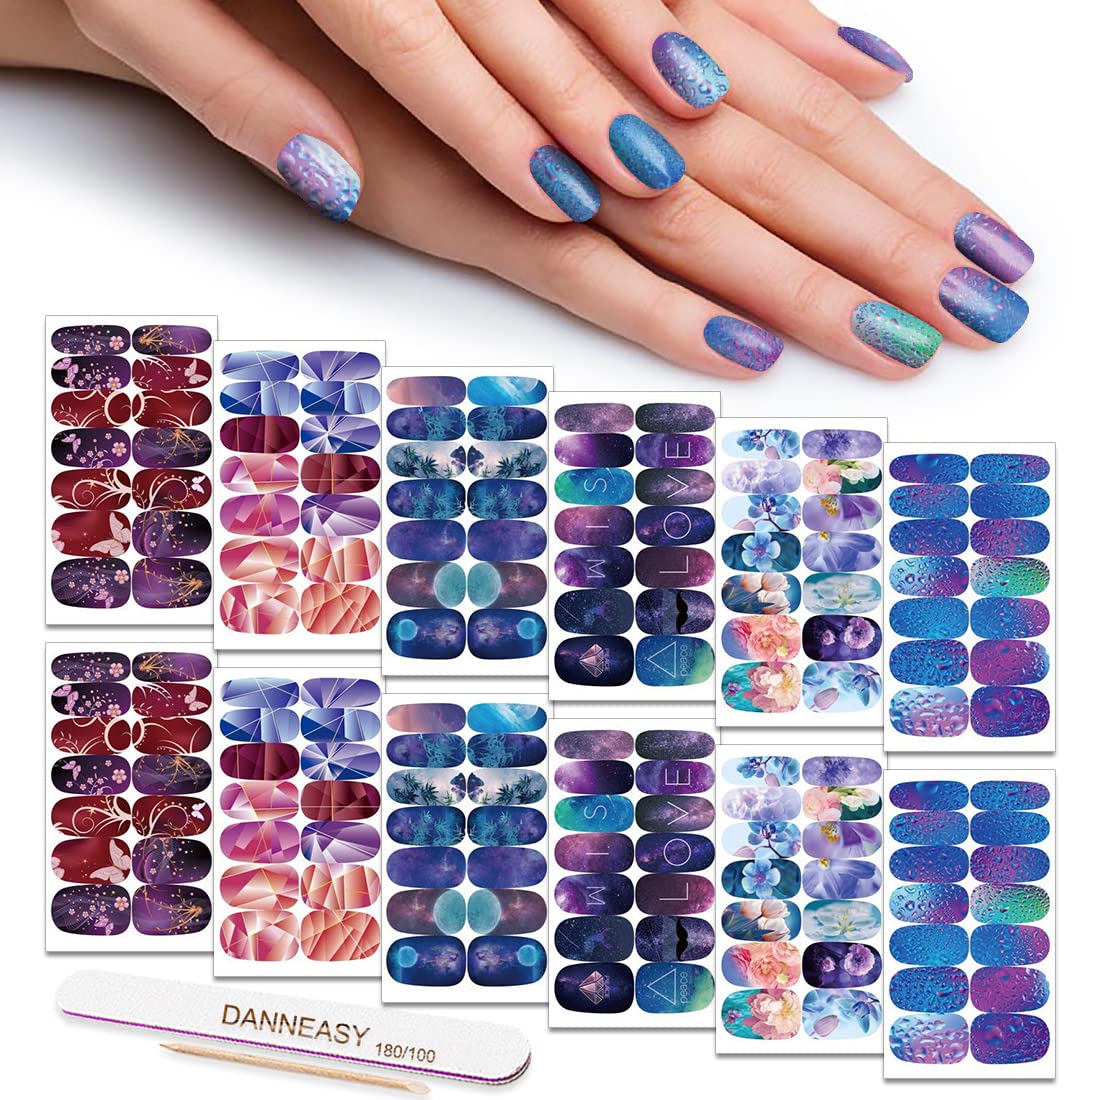 Product News: Essie Launches Sleek Stick Nail Stickers | The Beauty &  Lifestyle Hunter